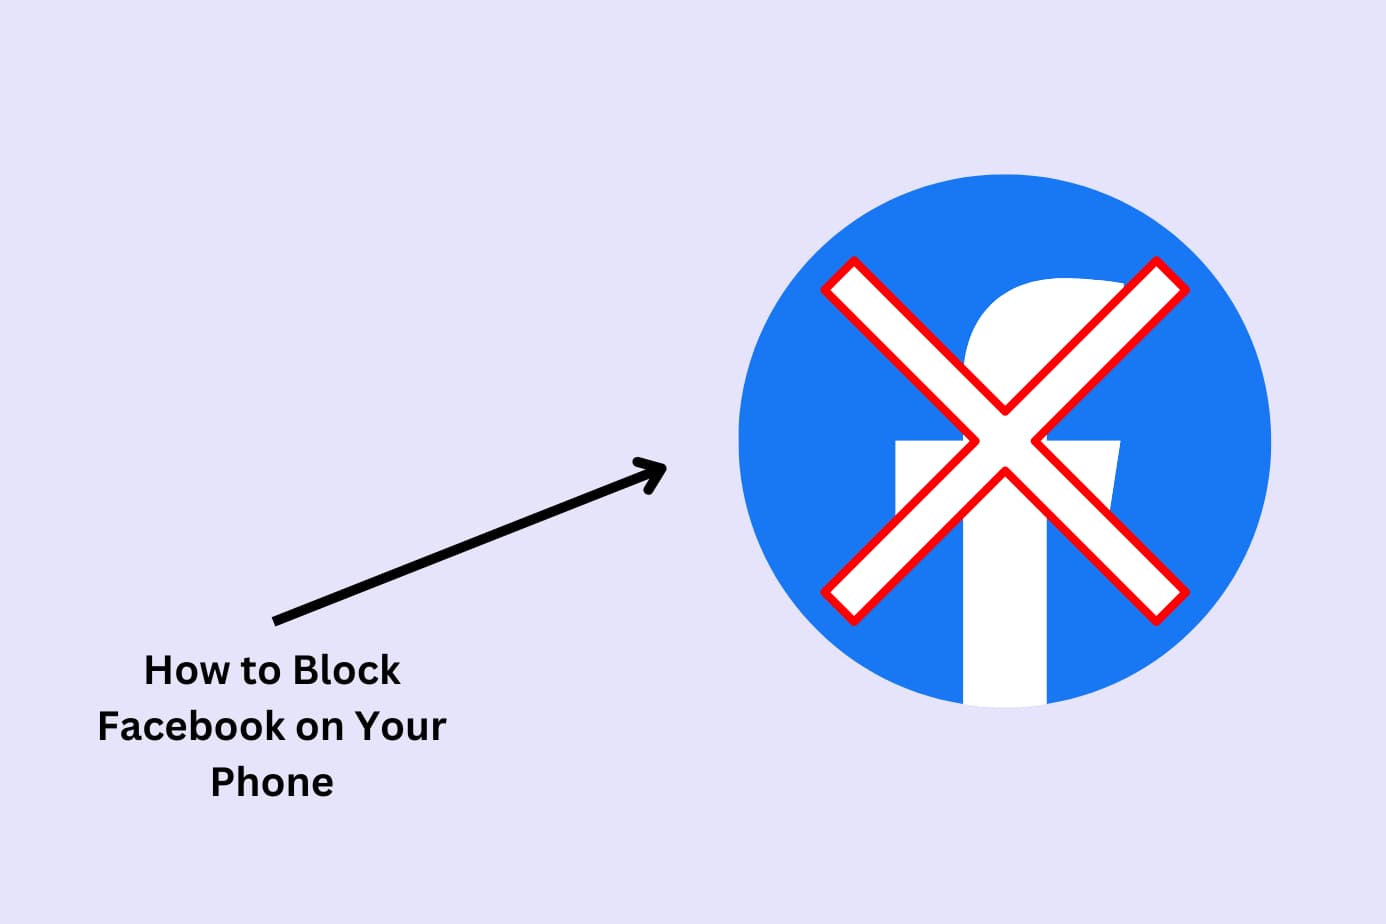 How to Block Facebook on Phone (iPhone and Android): 3 Methods